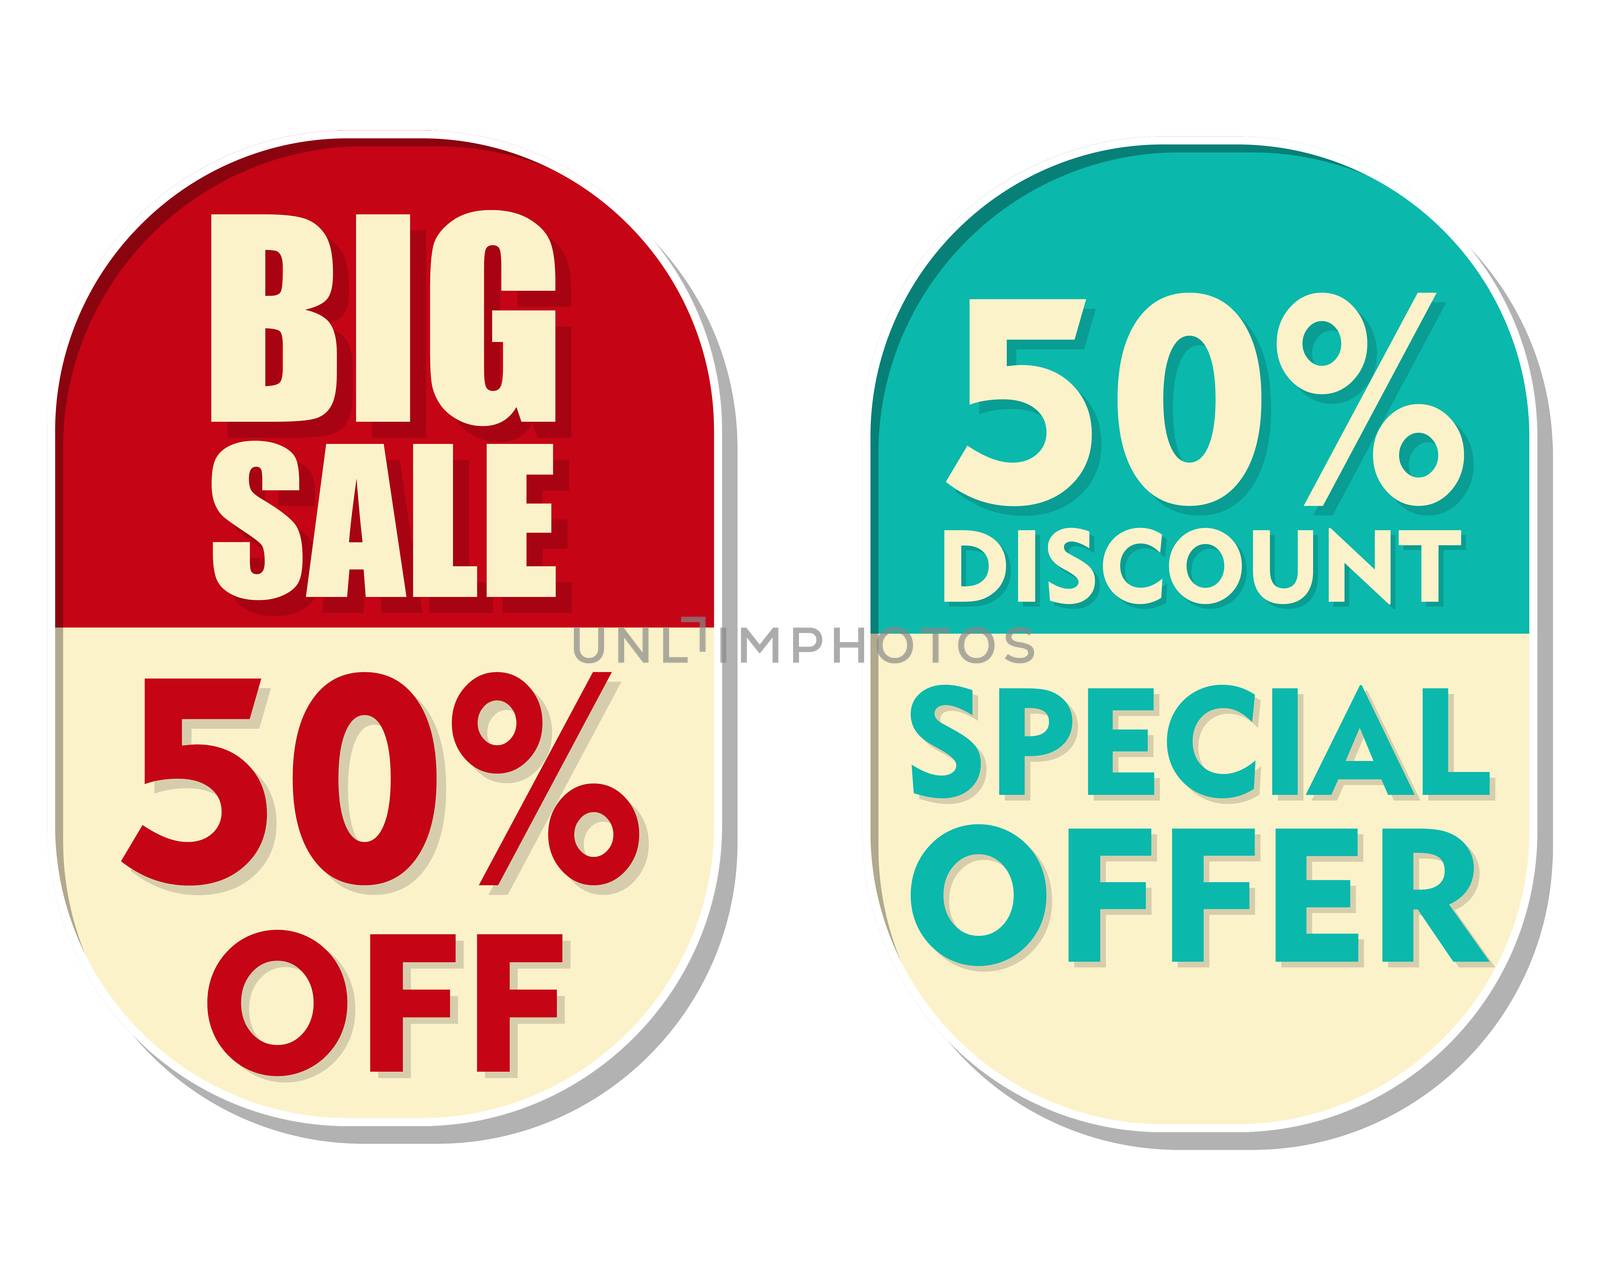 50 percent off discount, big sale and special offer, two ellipti by marinini